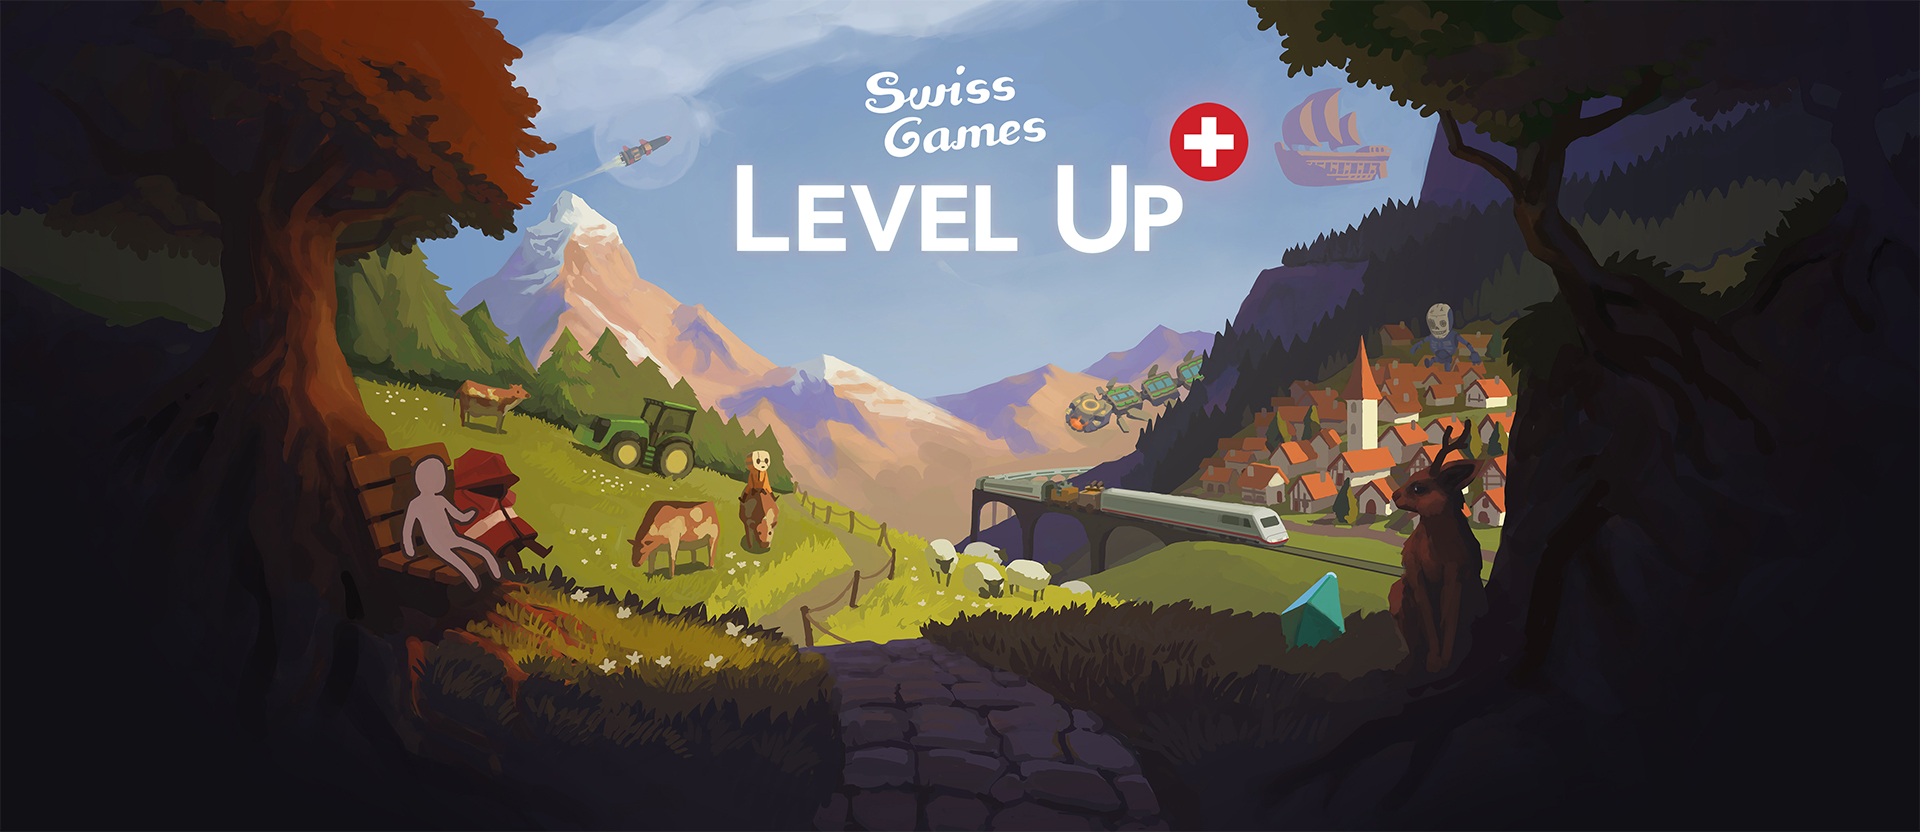 Fig 5 - Level up initiative to put the Swiss game industry on the map of local politics